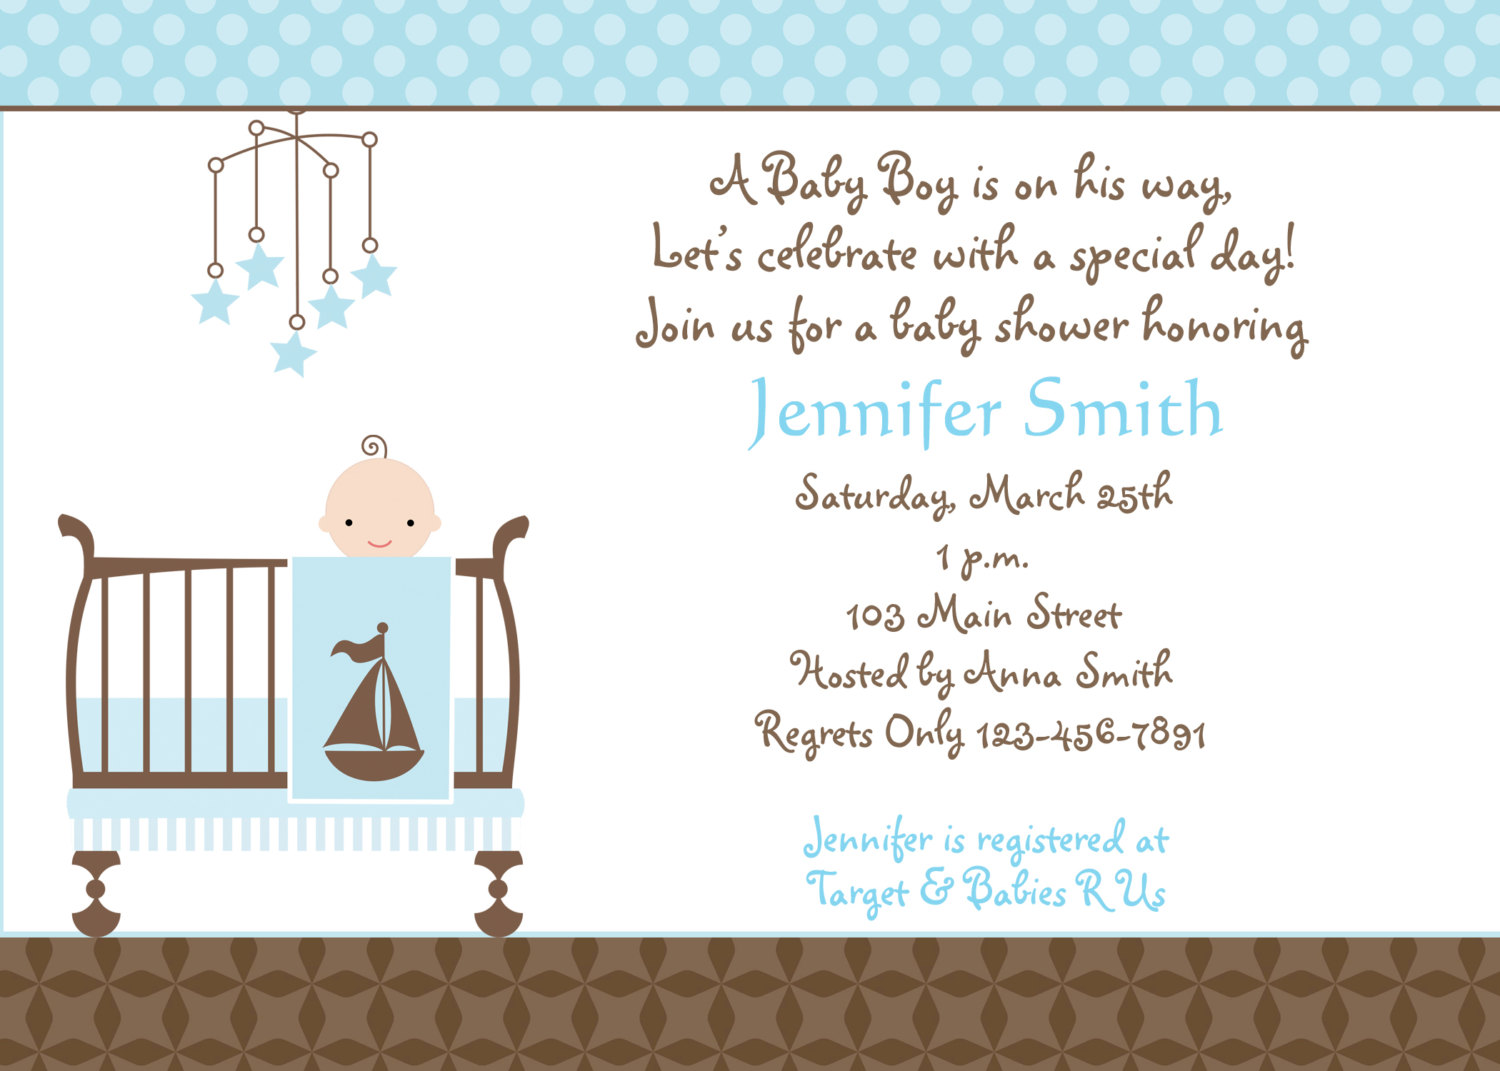 Full Size of Baby Shower:delightful Baby Shower Invitation Wording Picture Designs Baby Shower Invitation Wording Outstanding Baby Shower Invite Wording Boy Which Can Be Used As Free Baby Shower Invitations Outstanding Baby Shower Invite Wording Boy Which Can Be Used As Free